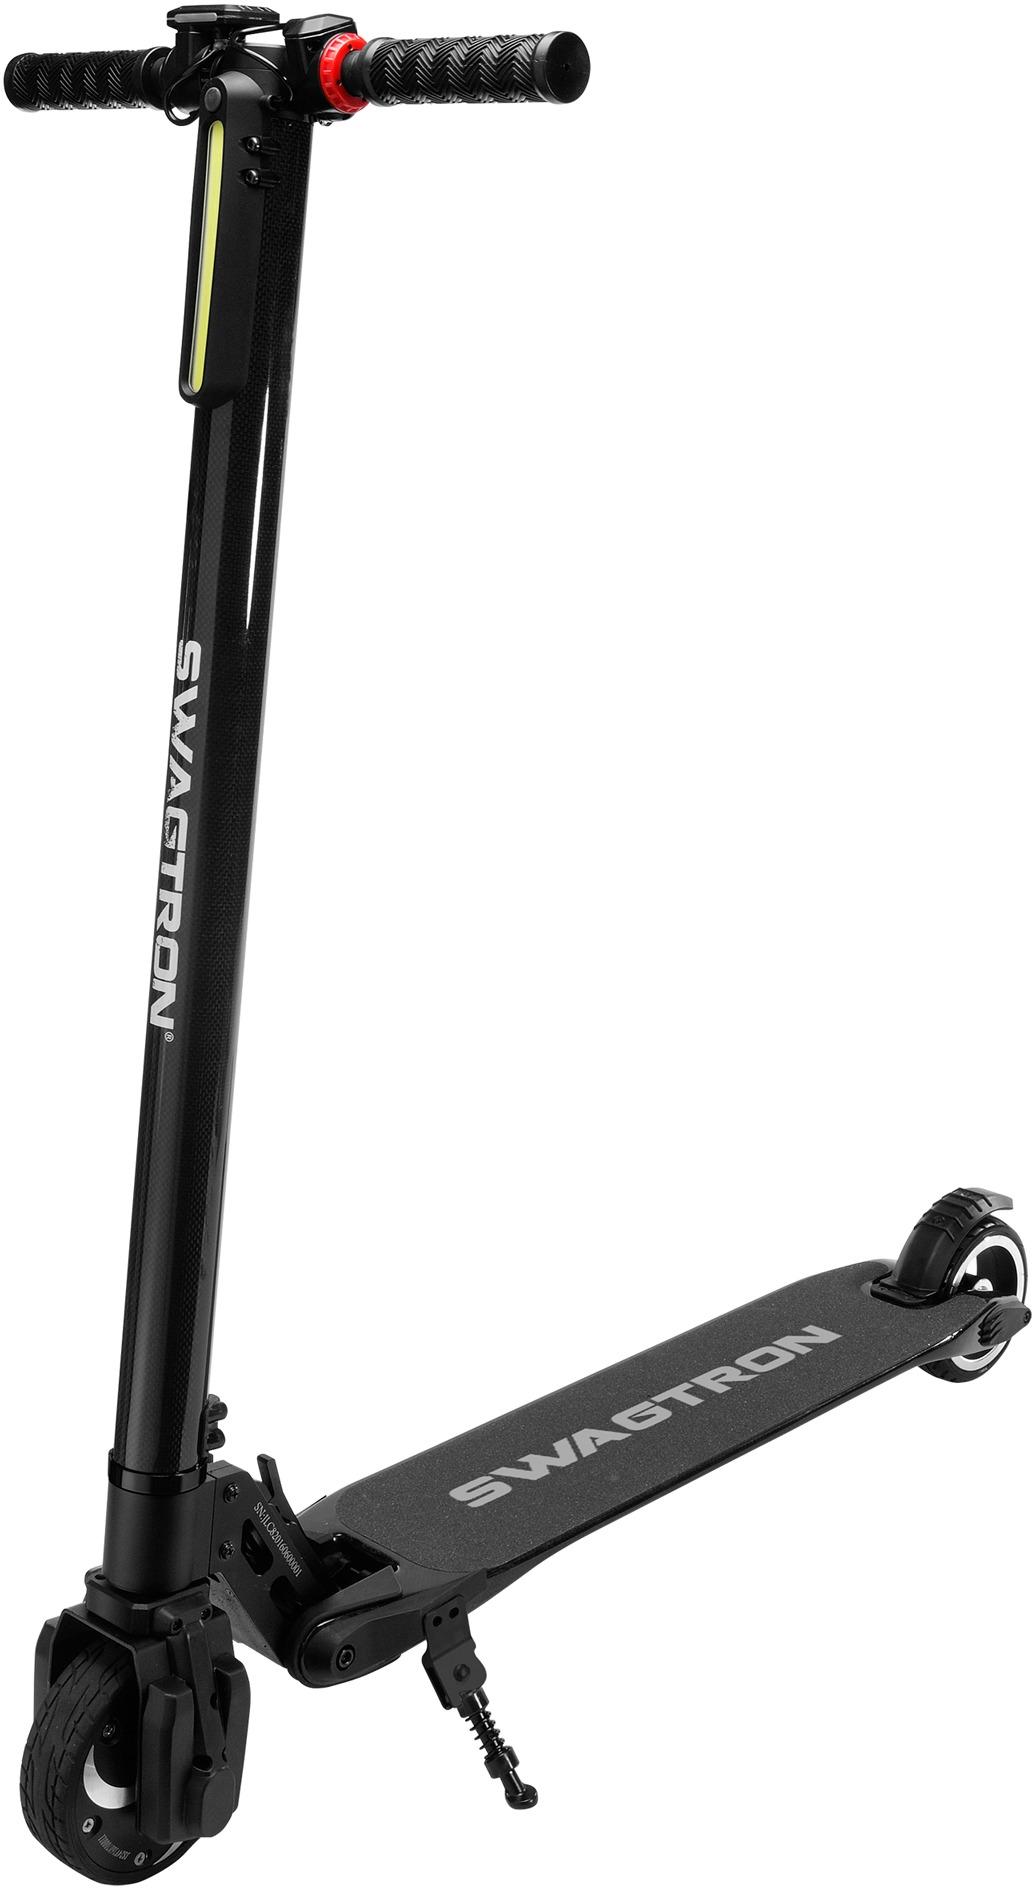 Swagtron Swagger Electric Scooter Black 